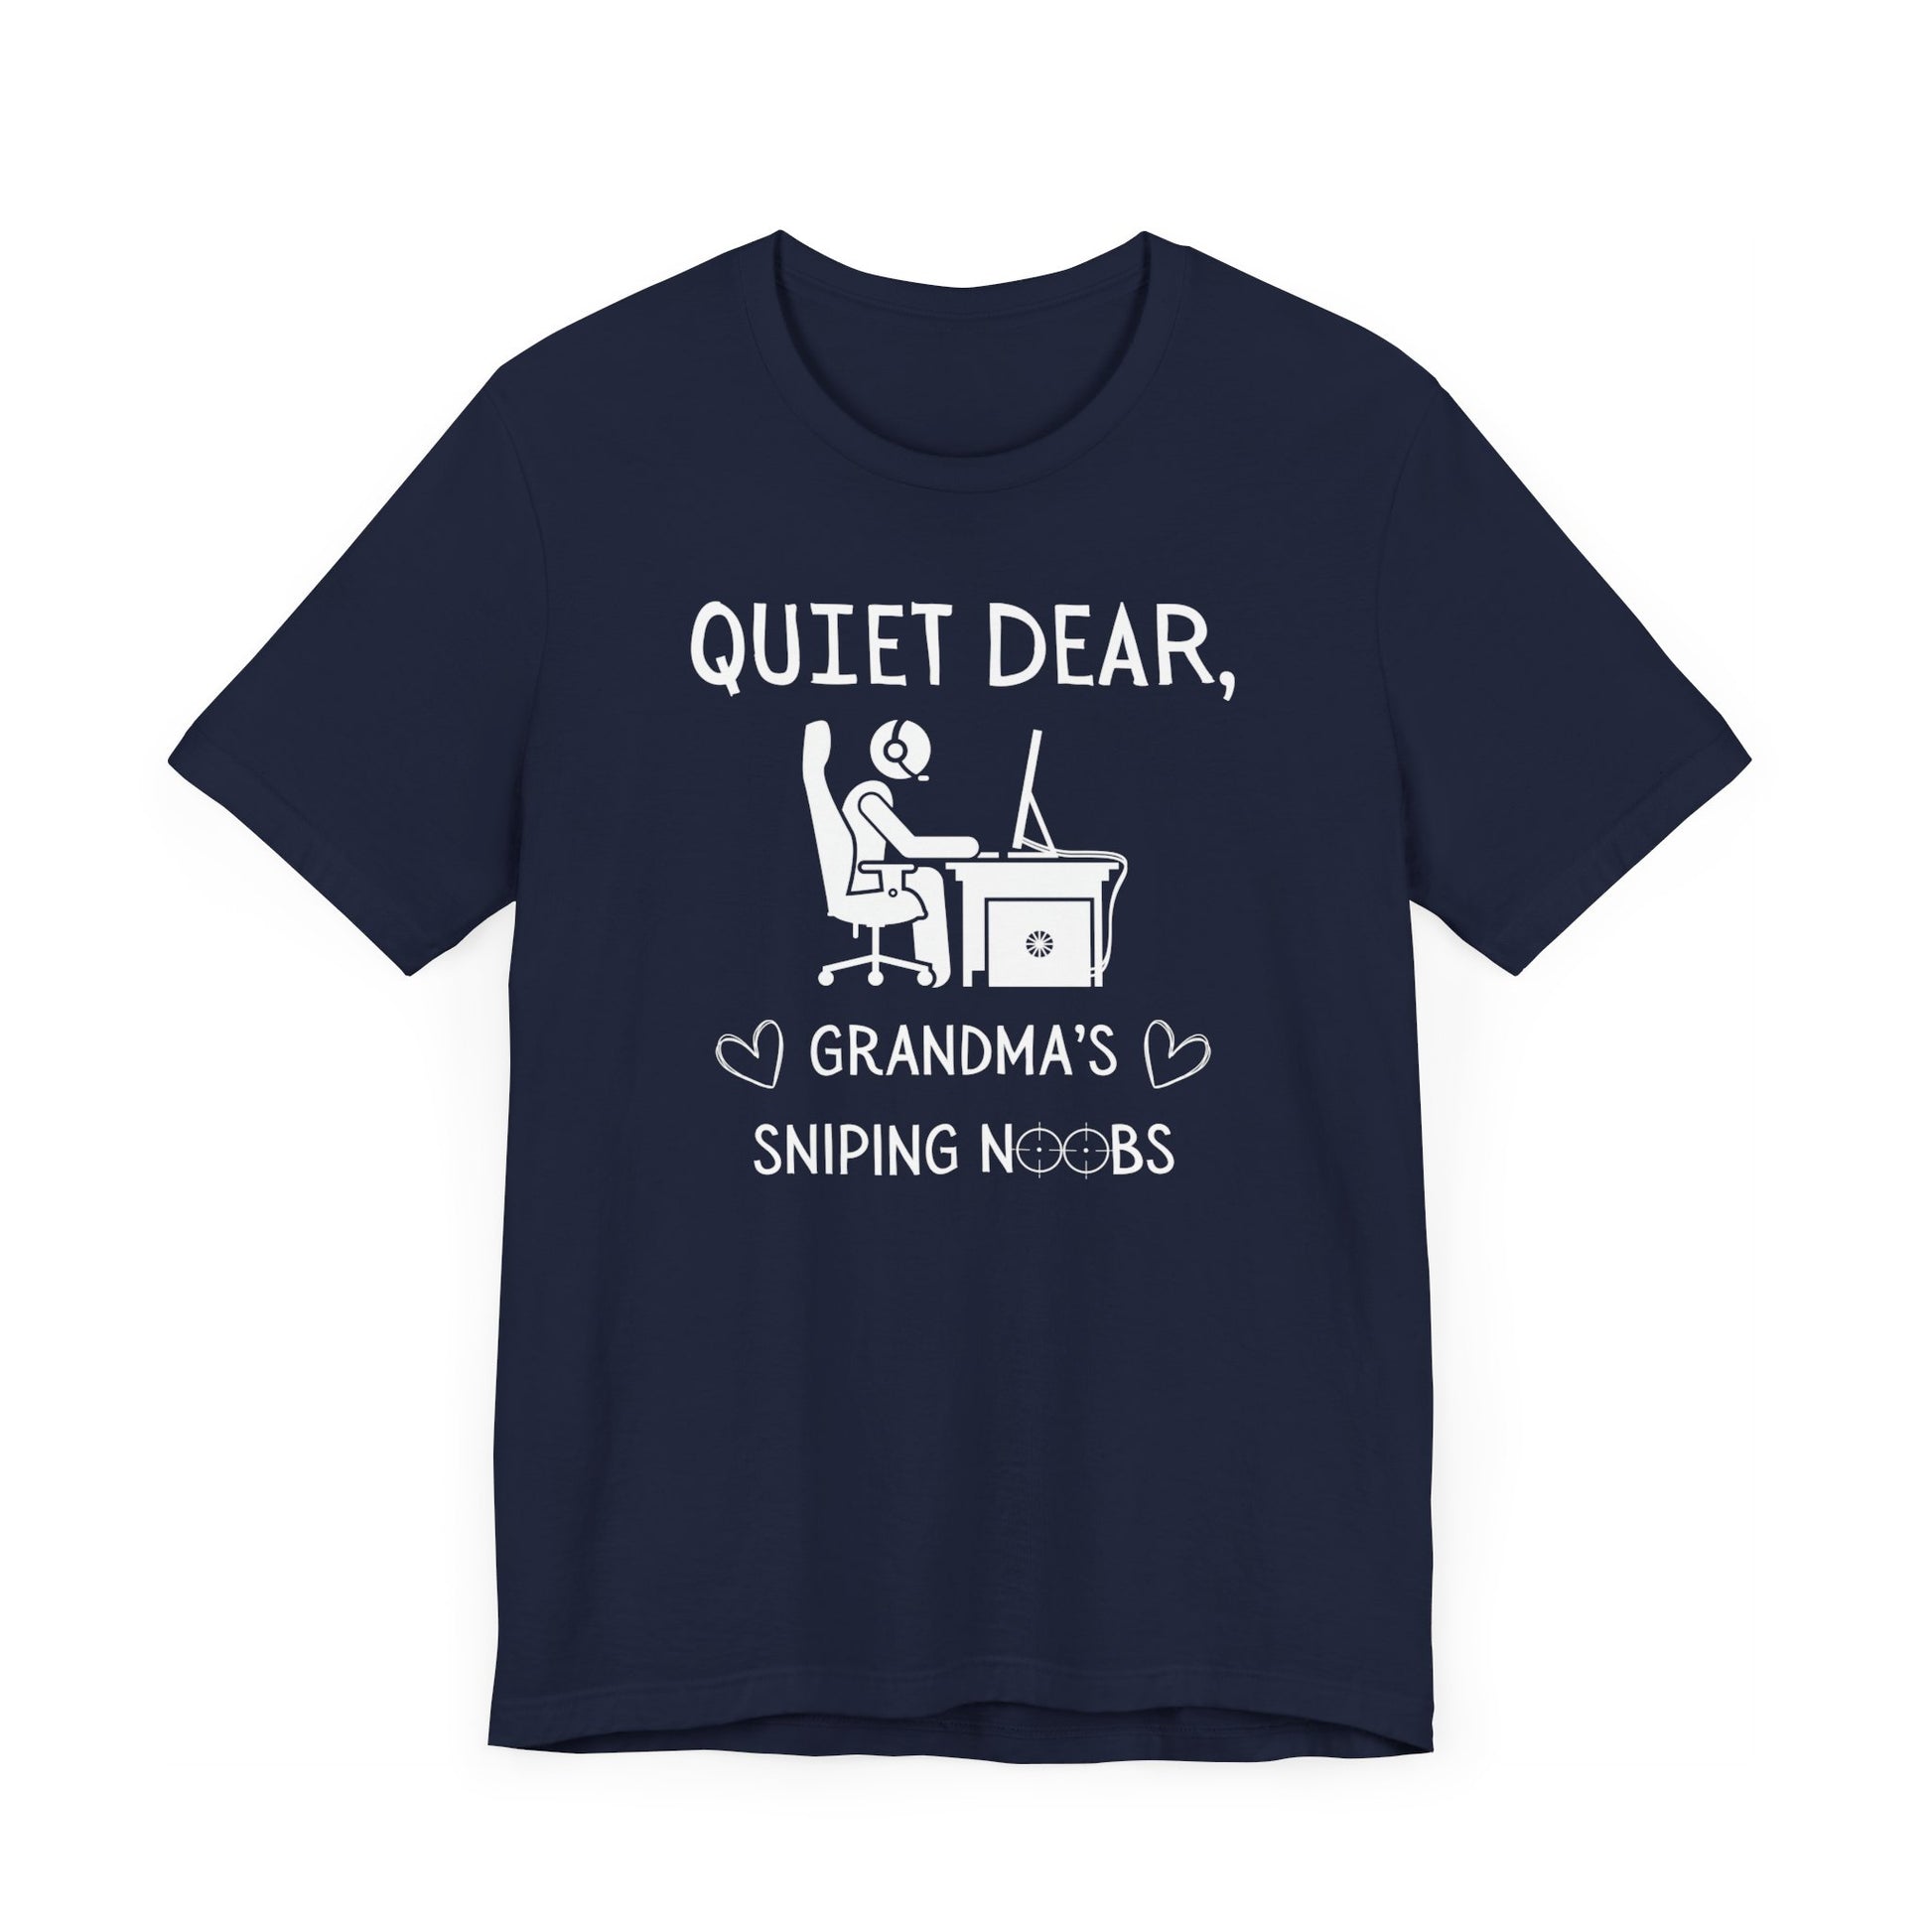 A flat image of a navy t-shirt that reads Quiet Dear, Grandma's Sniping Noobs in white text. The lower text is framed by two hearts, and the O's are in the shape of sniper scopes. In the center of the shirt is an image of a person at a desk with a gaming PC.